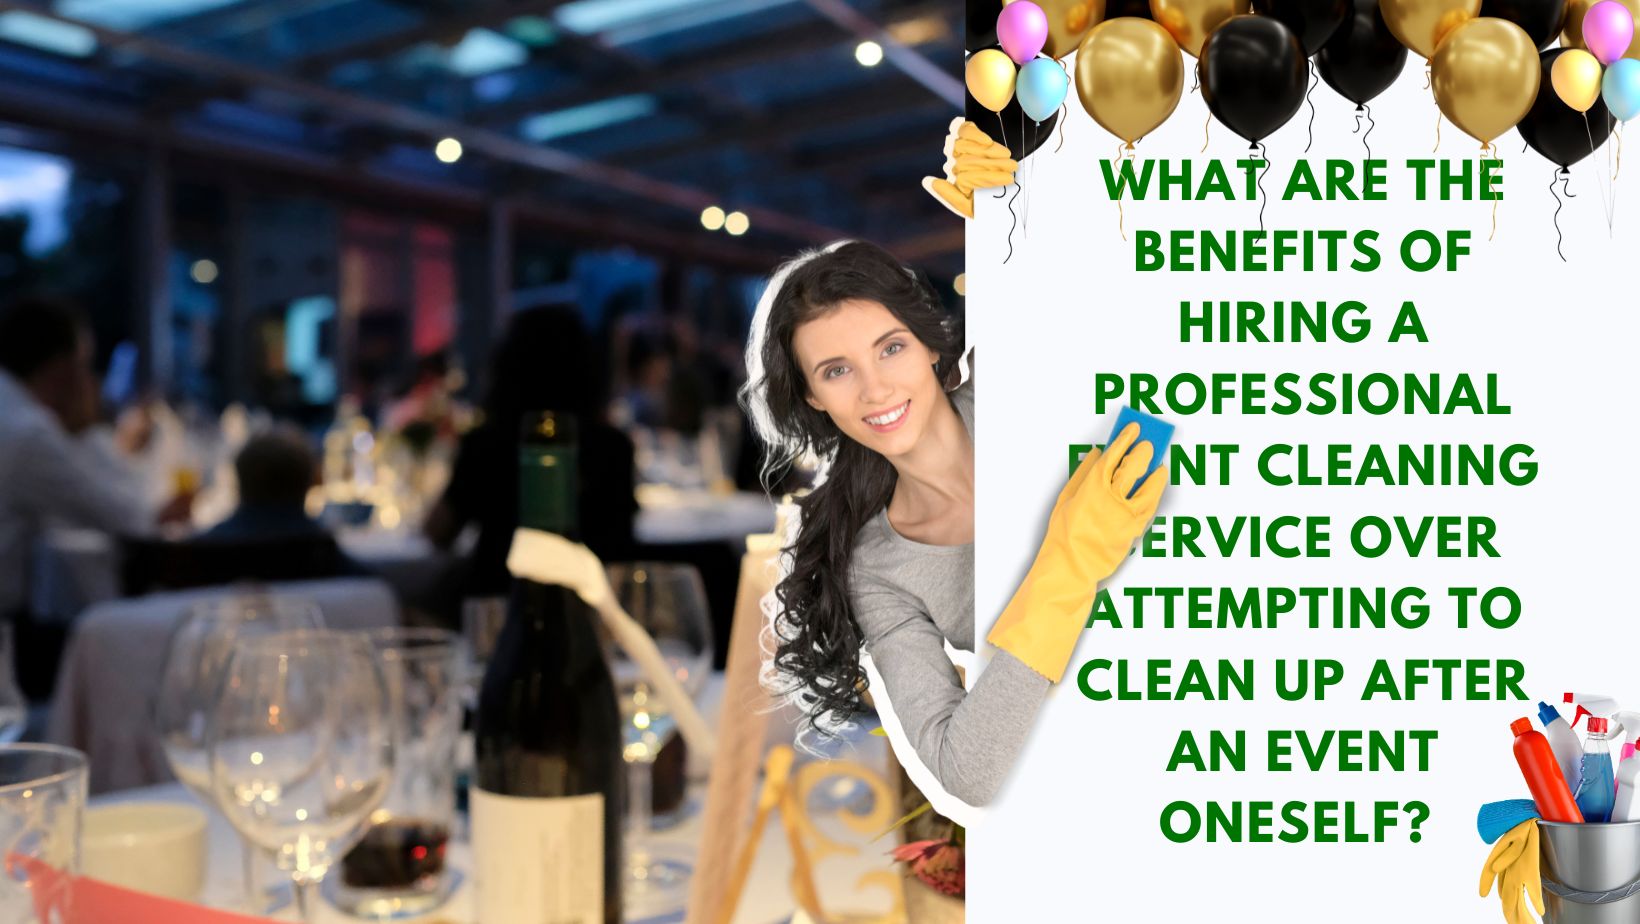 You are currently viewing What Are The Benefits Of Hiring A Professional Event Cleaning Service Over Attempting To Clean Up After An Event Oneself?